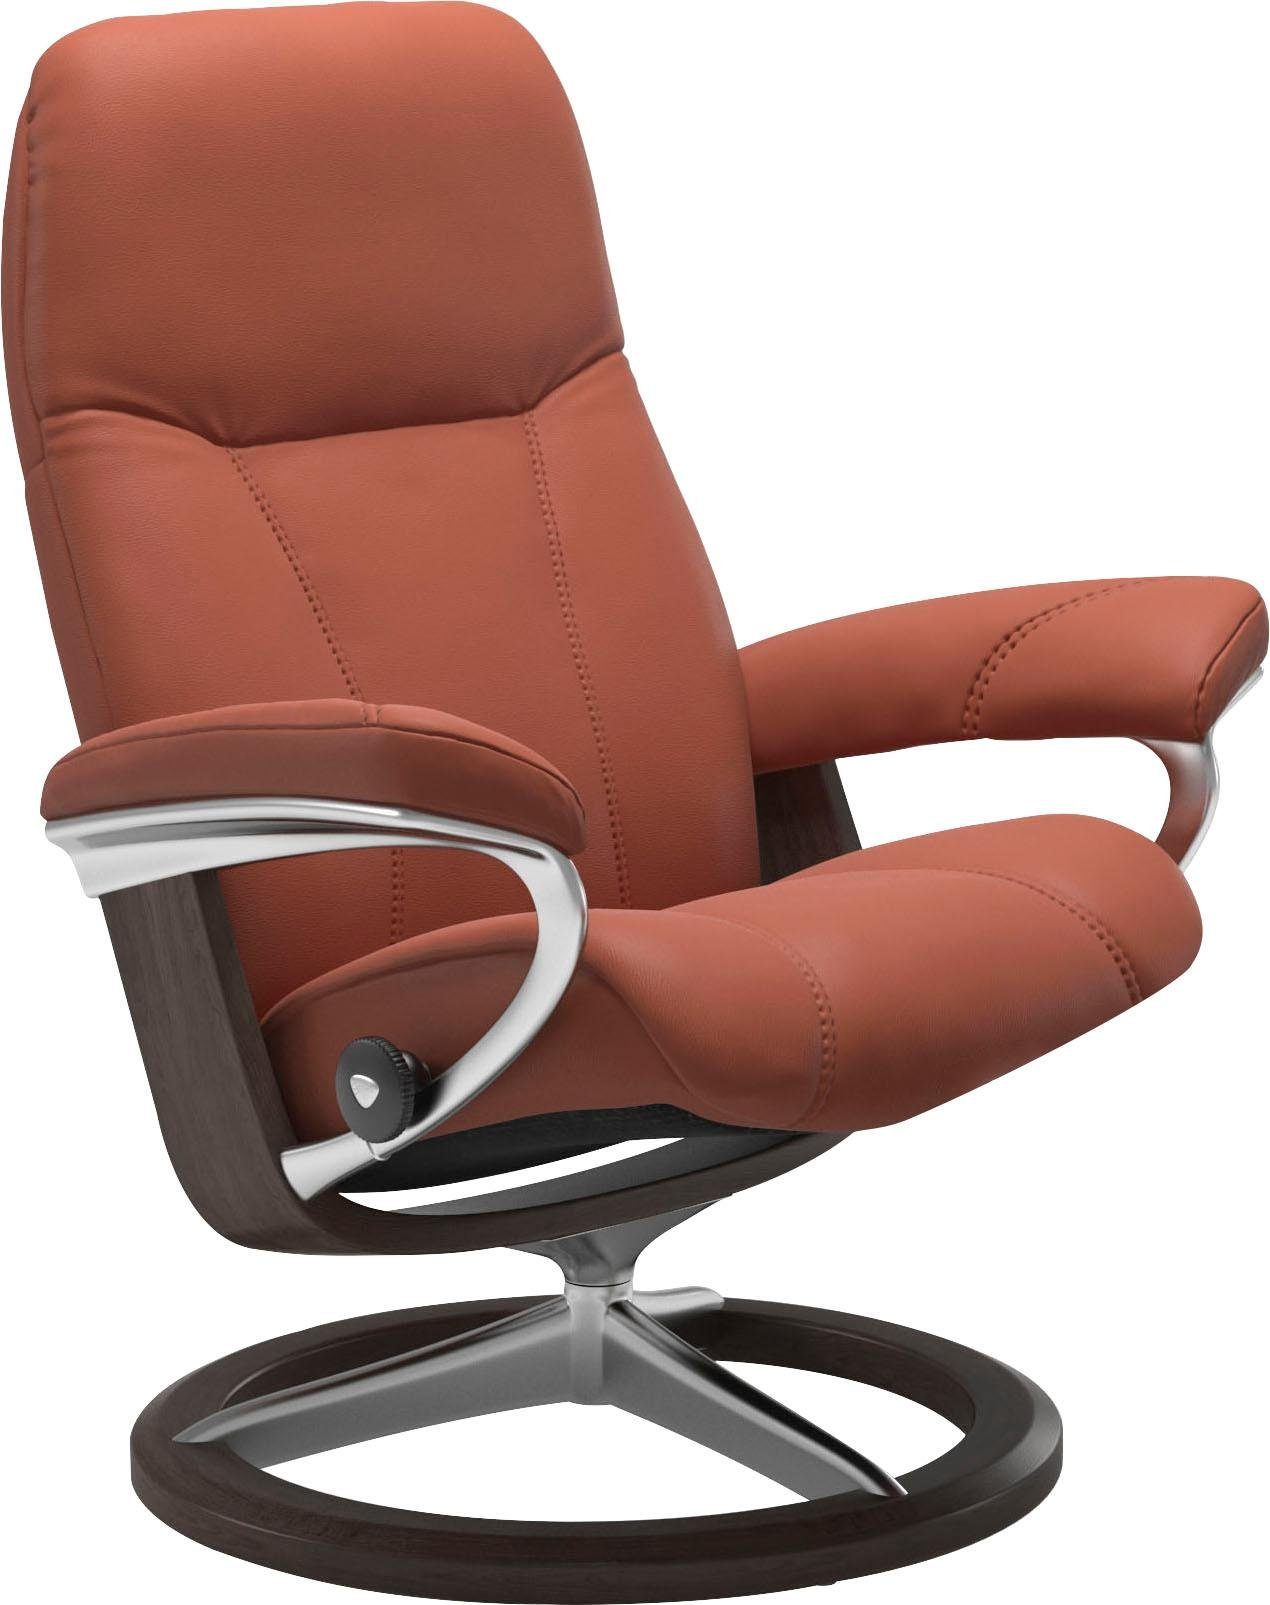 Consul, Wenge mit Base, Gestell Größe L, Stressless® Relaxsessel Signature